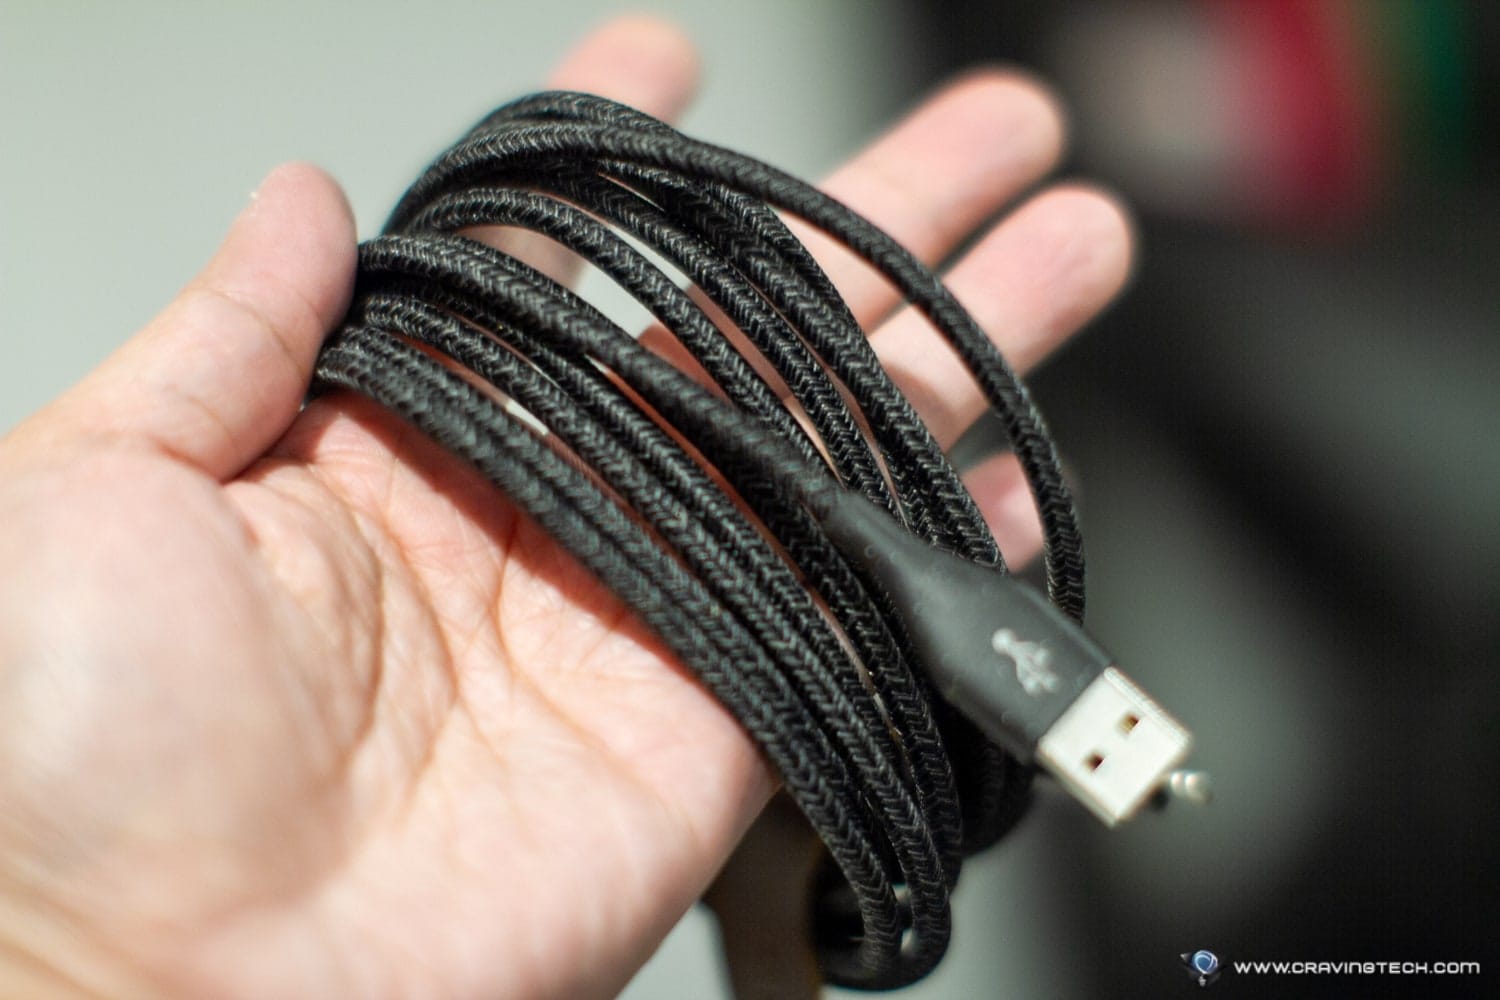 These tough charging cables are made from the same materials that strengthen tennis racquets and surfboards